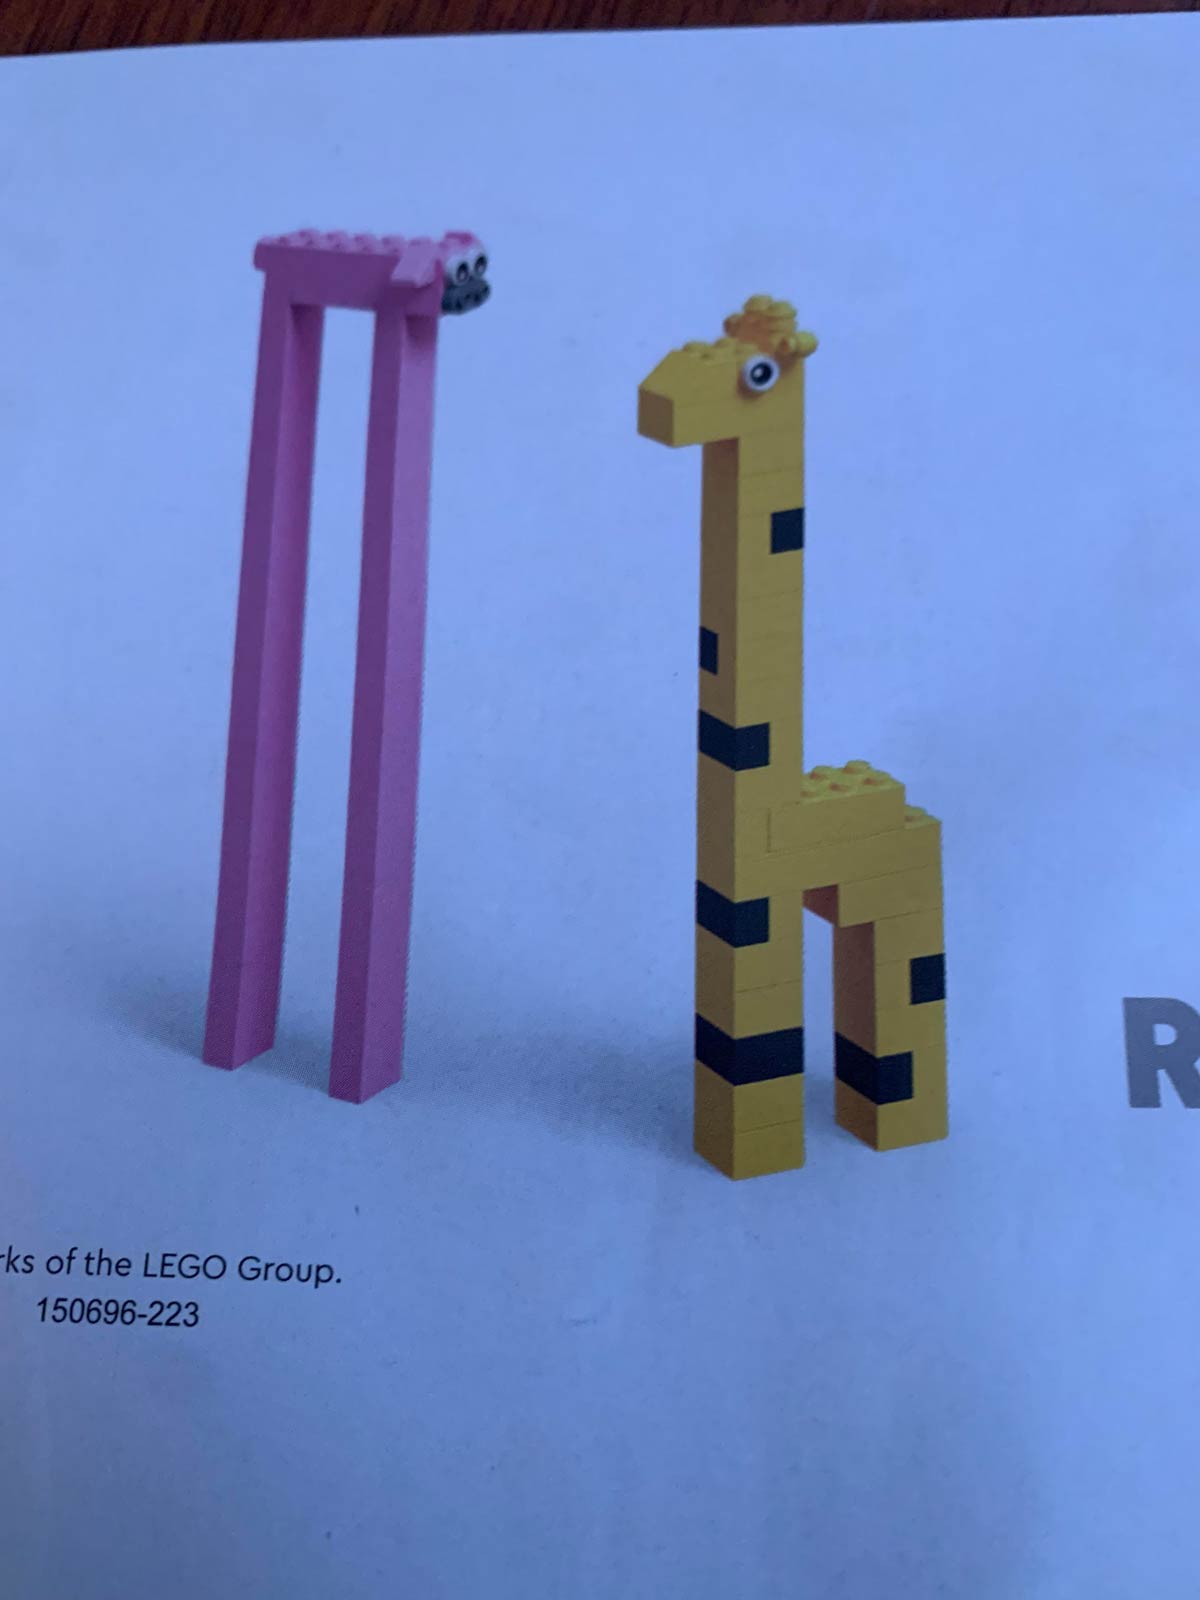 Found this on the back of my Lego instructions